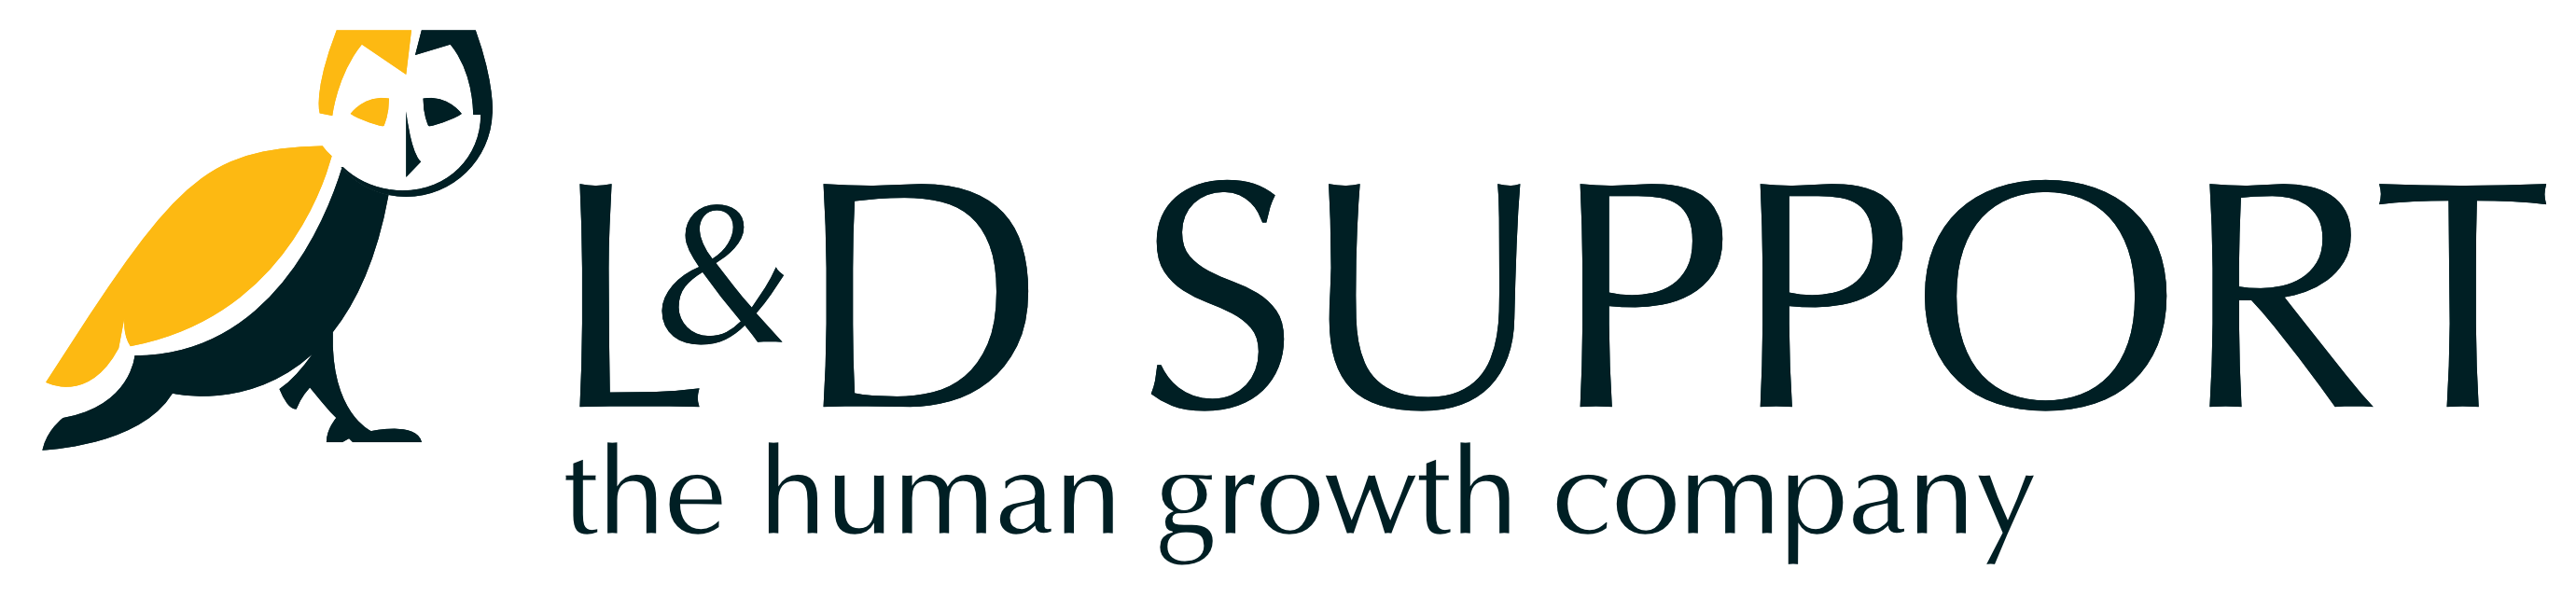 L&D Support - the human growth company